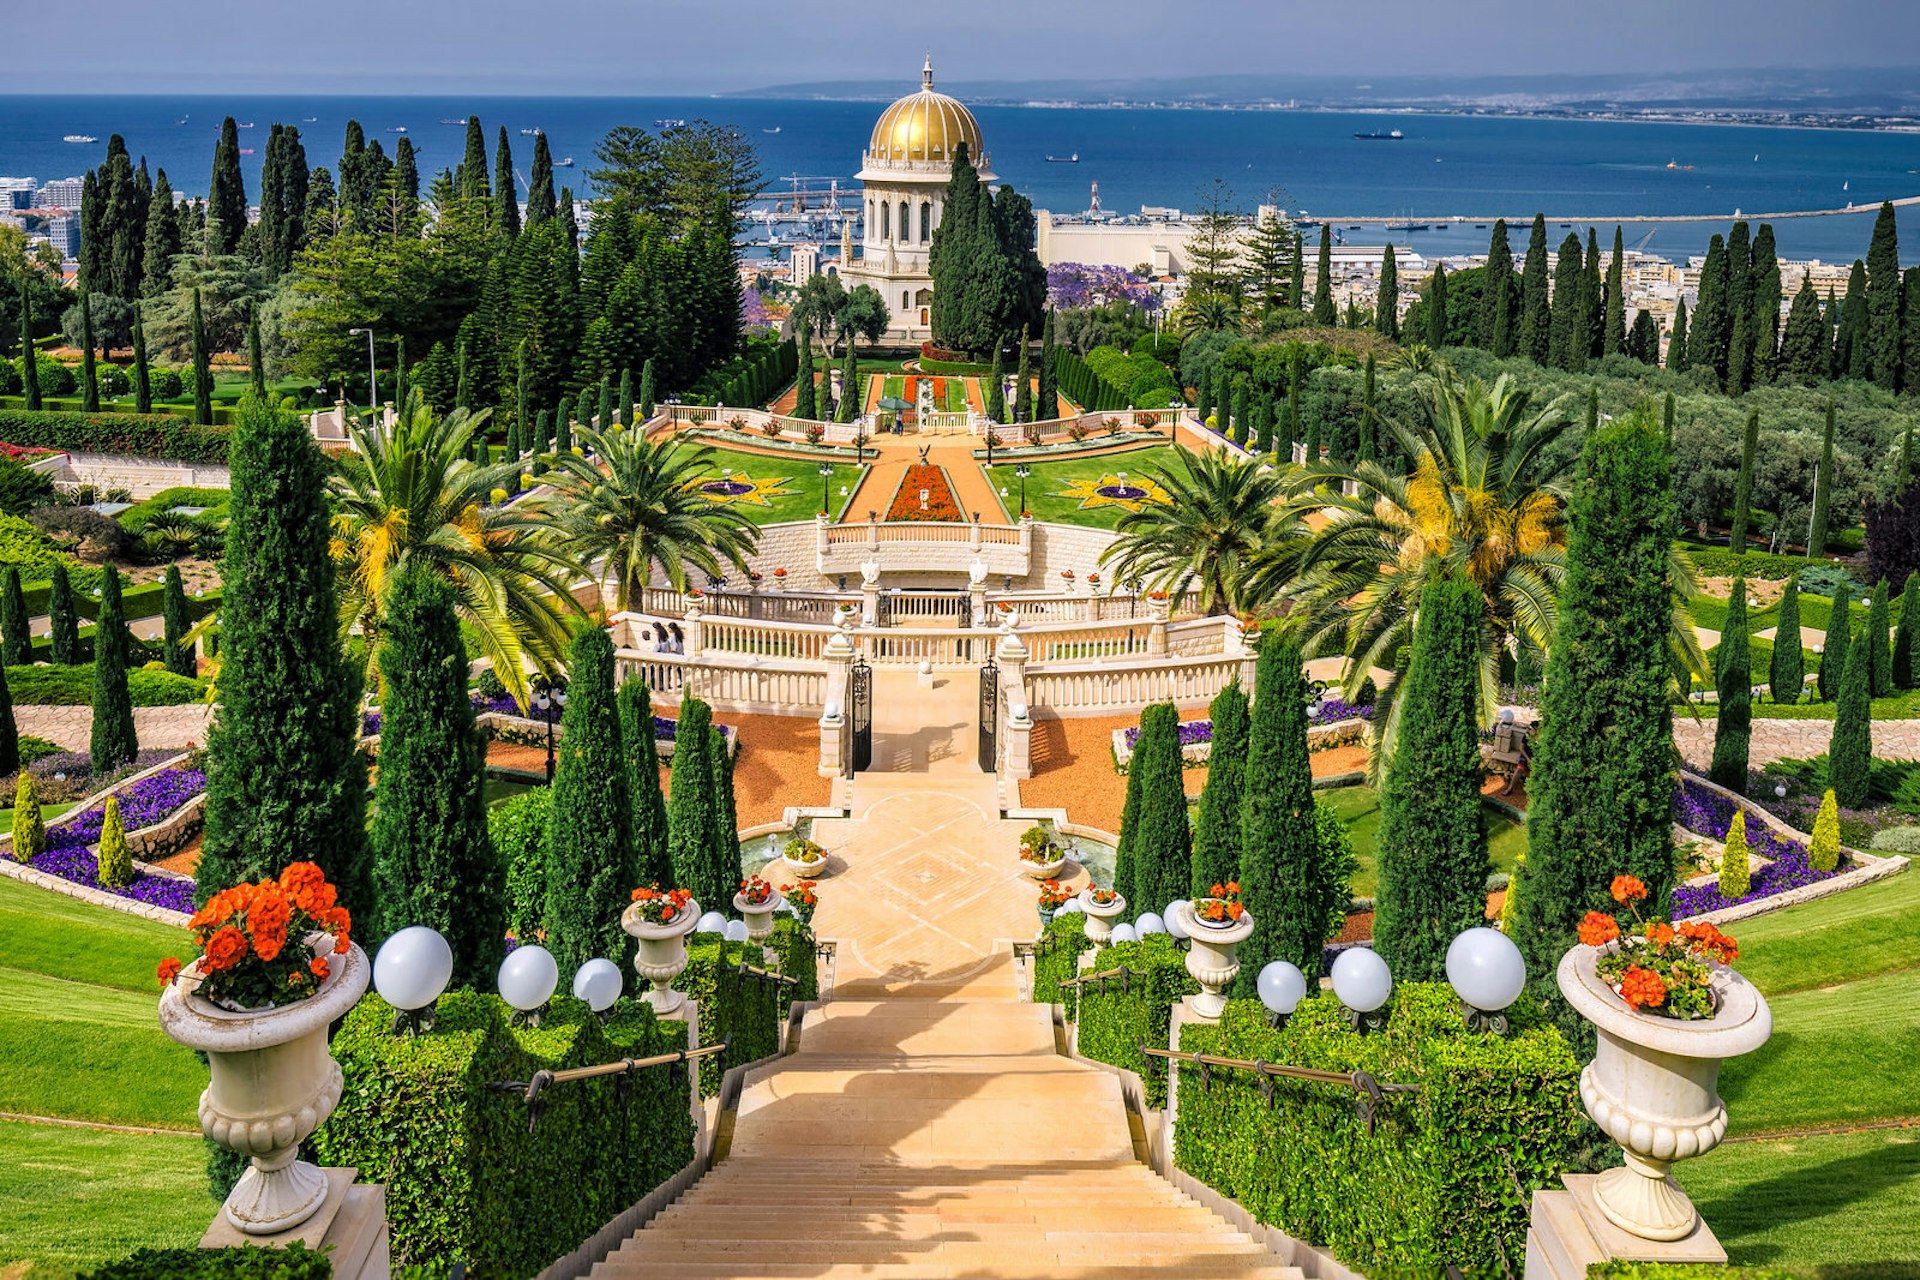 Bahai gardens and temple on the slopes of Mt Carmel and view of the Mediterranean Sea and bay of Haifa, Israel. Image by Ruslan Kalnitsky / Shutterstock